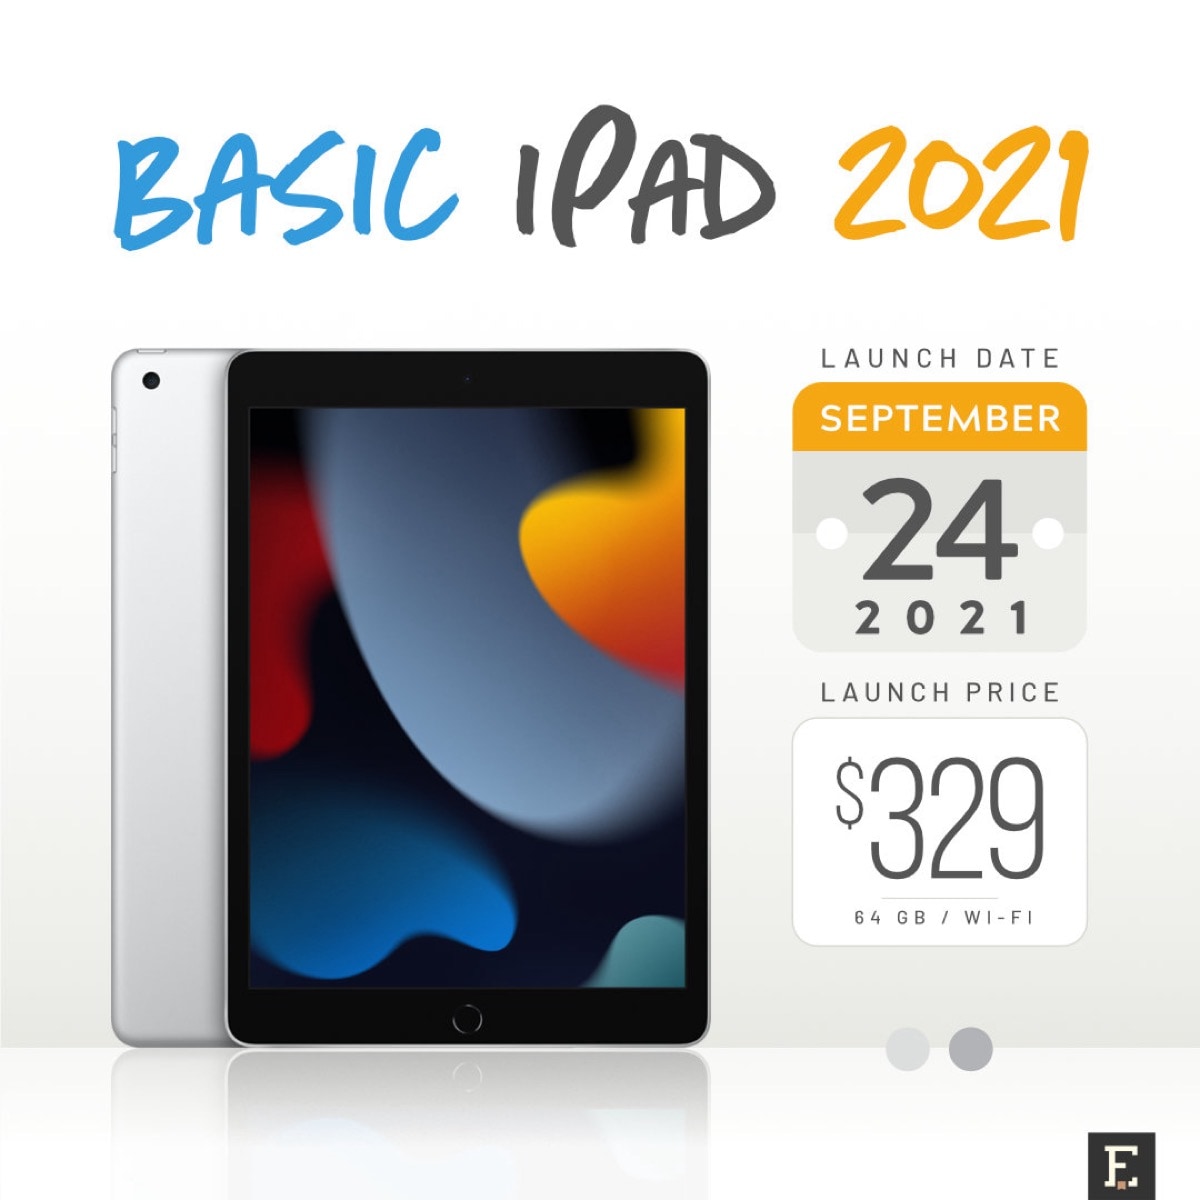 Basic iPad 2021 features, Q&A, and full specs